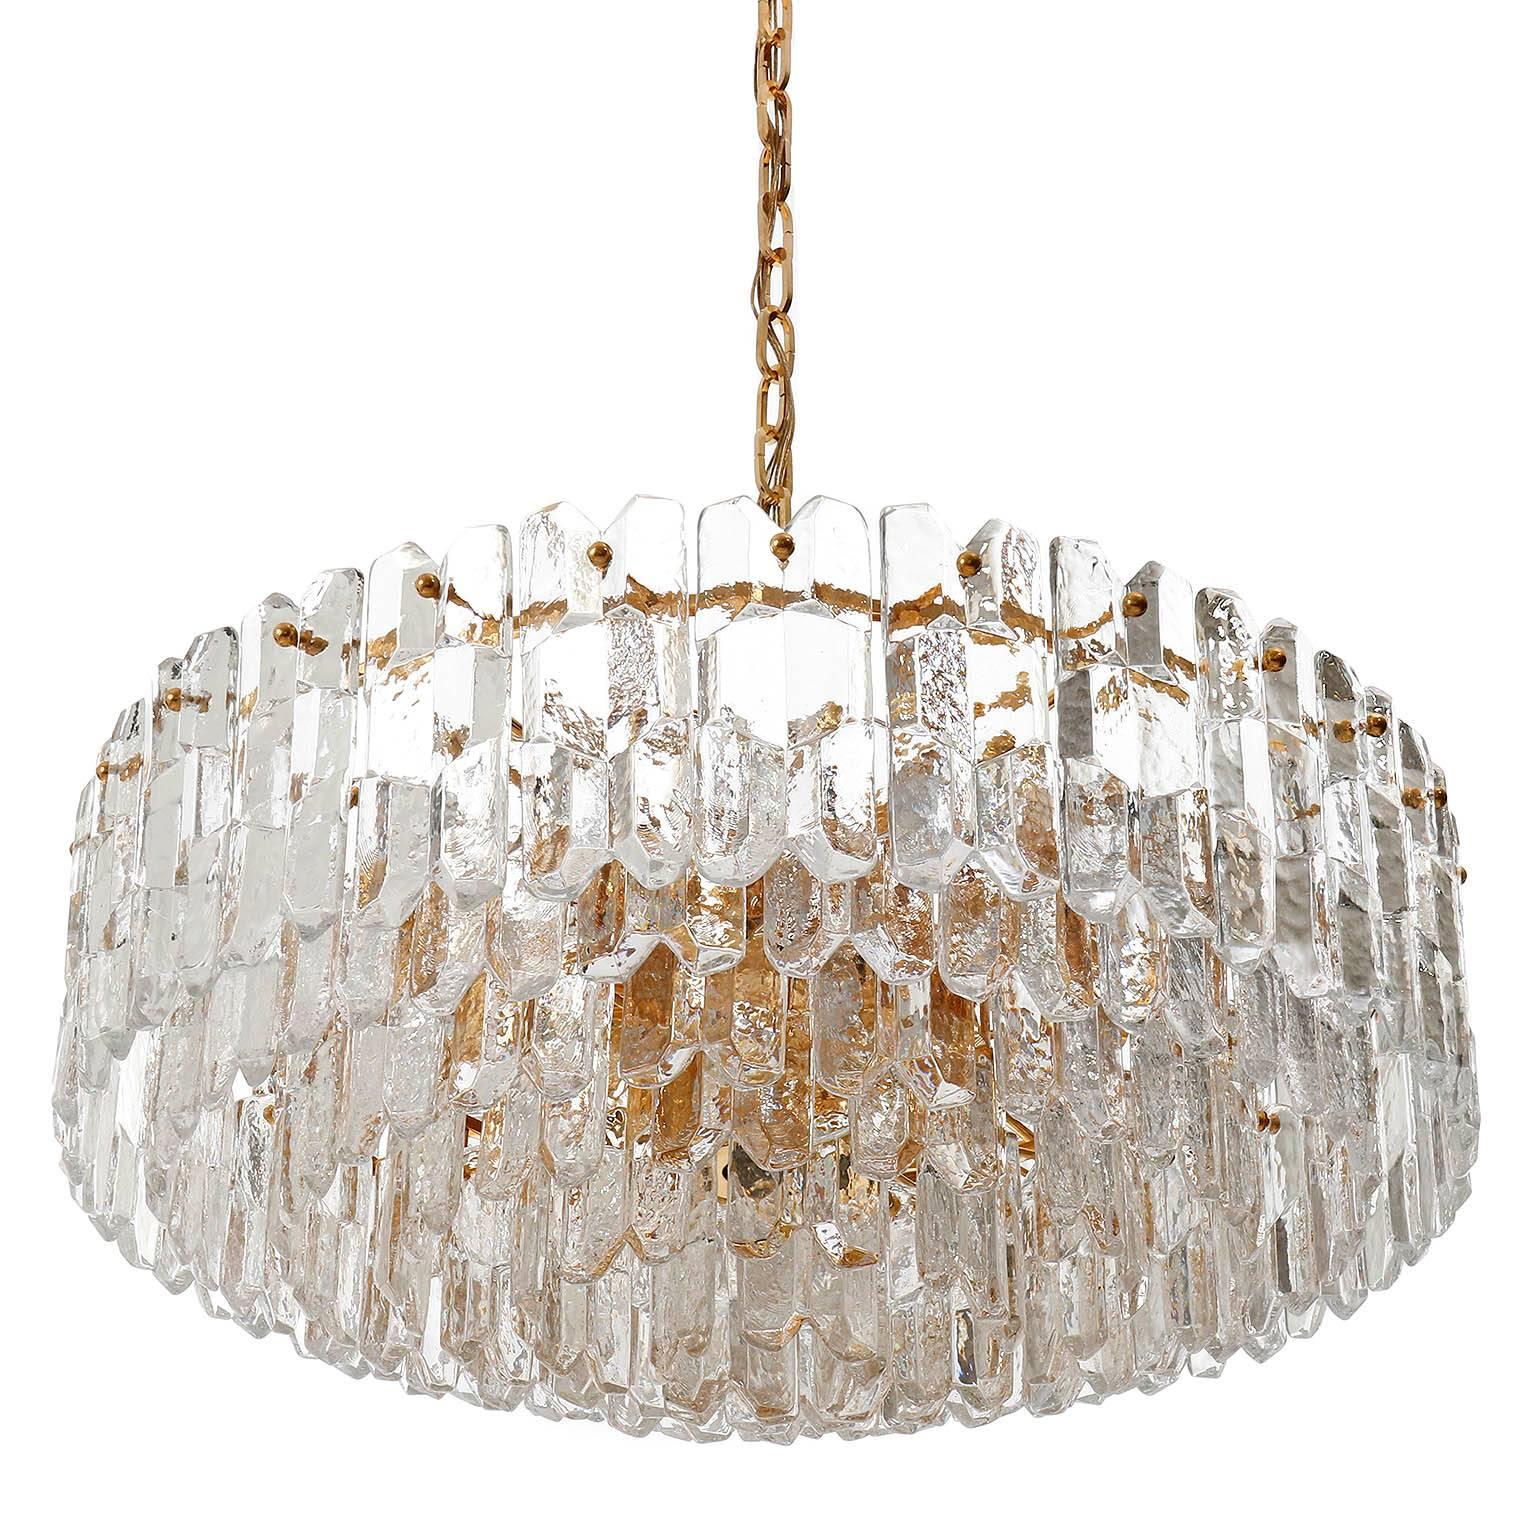 An extra large and very exquisite 24-carat gold-plated brass and clear brilliant glass 'Palazzo' chandelier by J.T. Kalmar, Vienna, Austria, manufactured in circa 1970, (late 1960s and early 1970s).
The fixture is labeled and documented in the